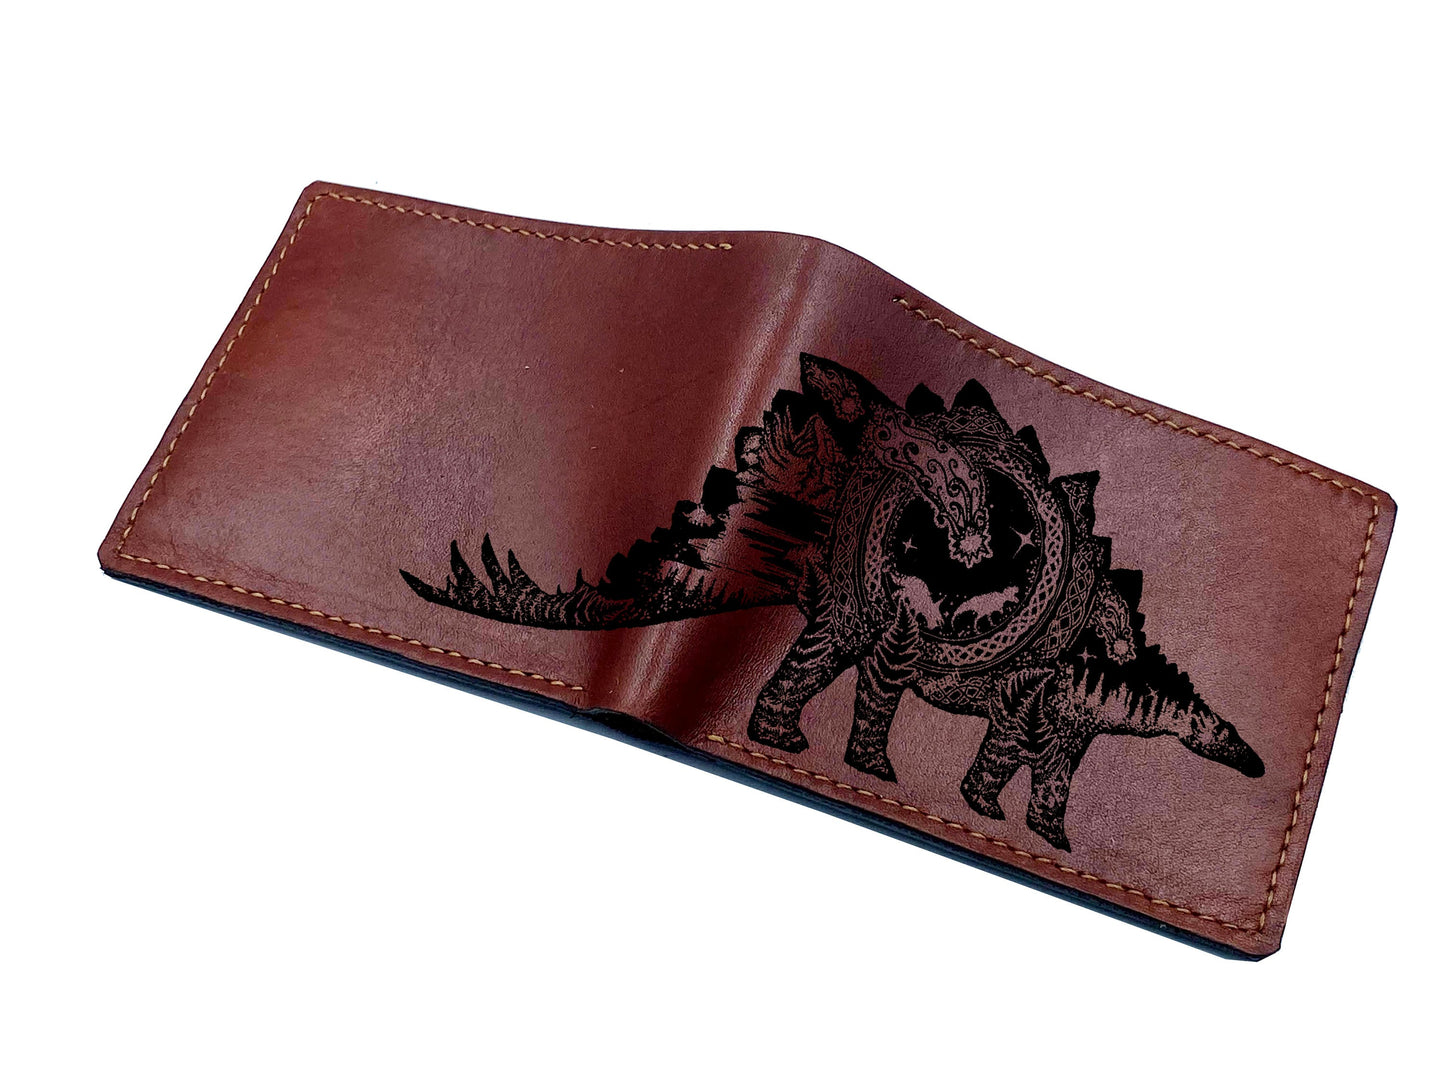 Personalized Rhino animal wallet, tattoo style men's gift, leather men's wallet, custom engraved wallet, present for dad, birthday gift idea